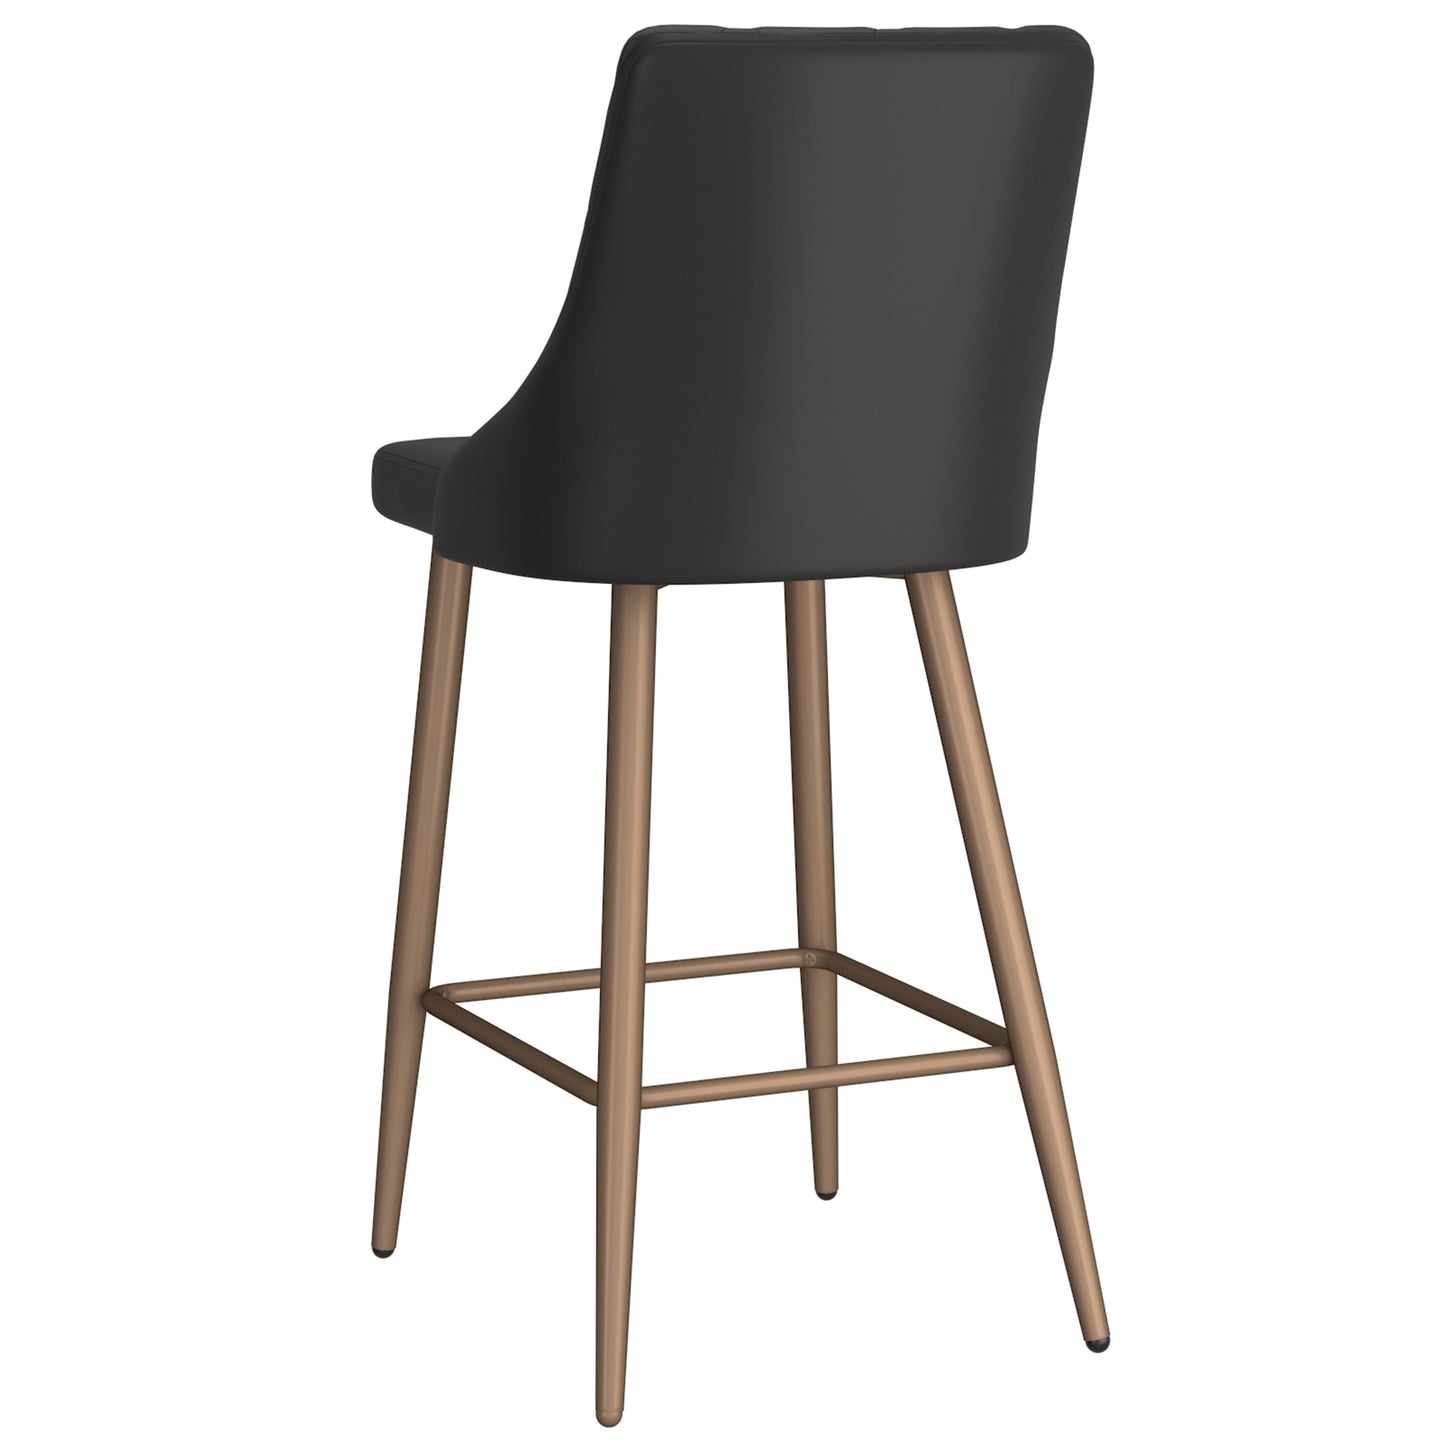 (ANTOINE BLACK- 2 PACK) - LEATHER COUNTER STOOLS